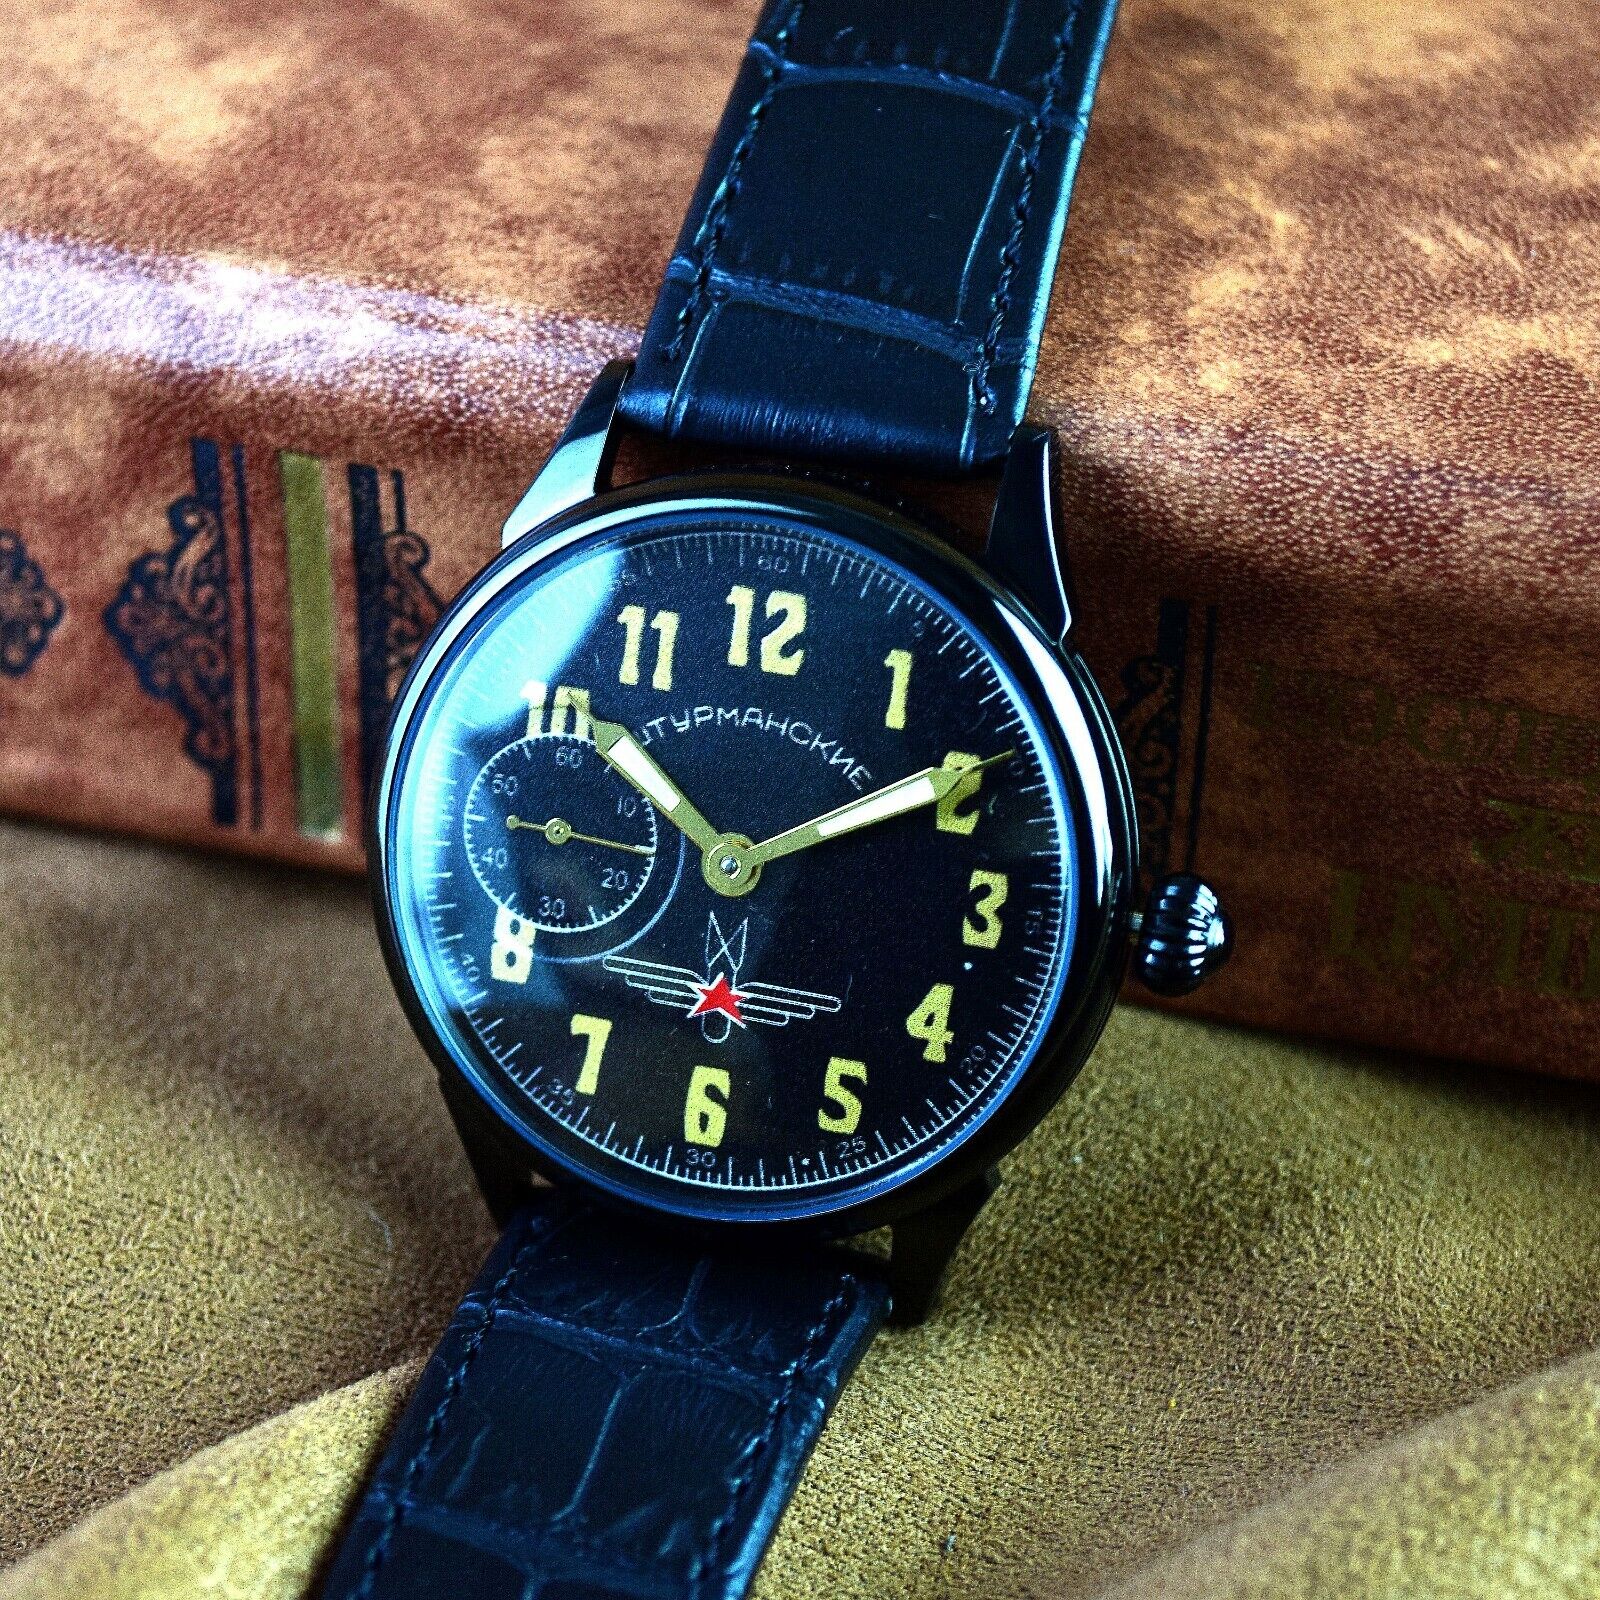 Soviet Watch Marriage Aviator Pilot Military Style Limited Edition Leather Band